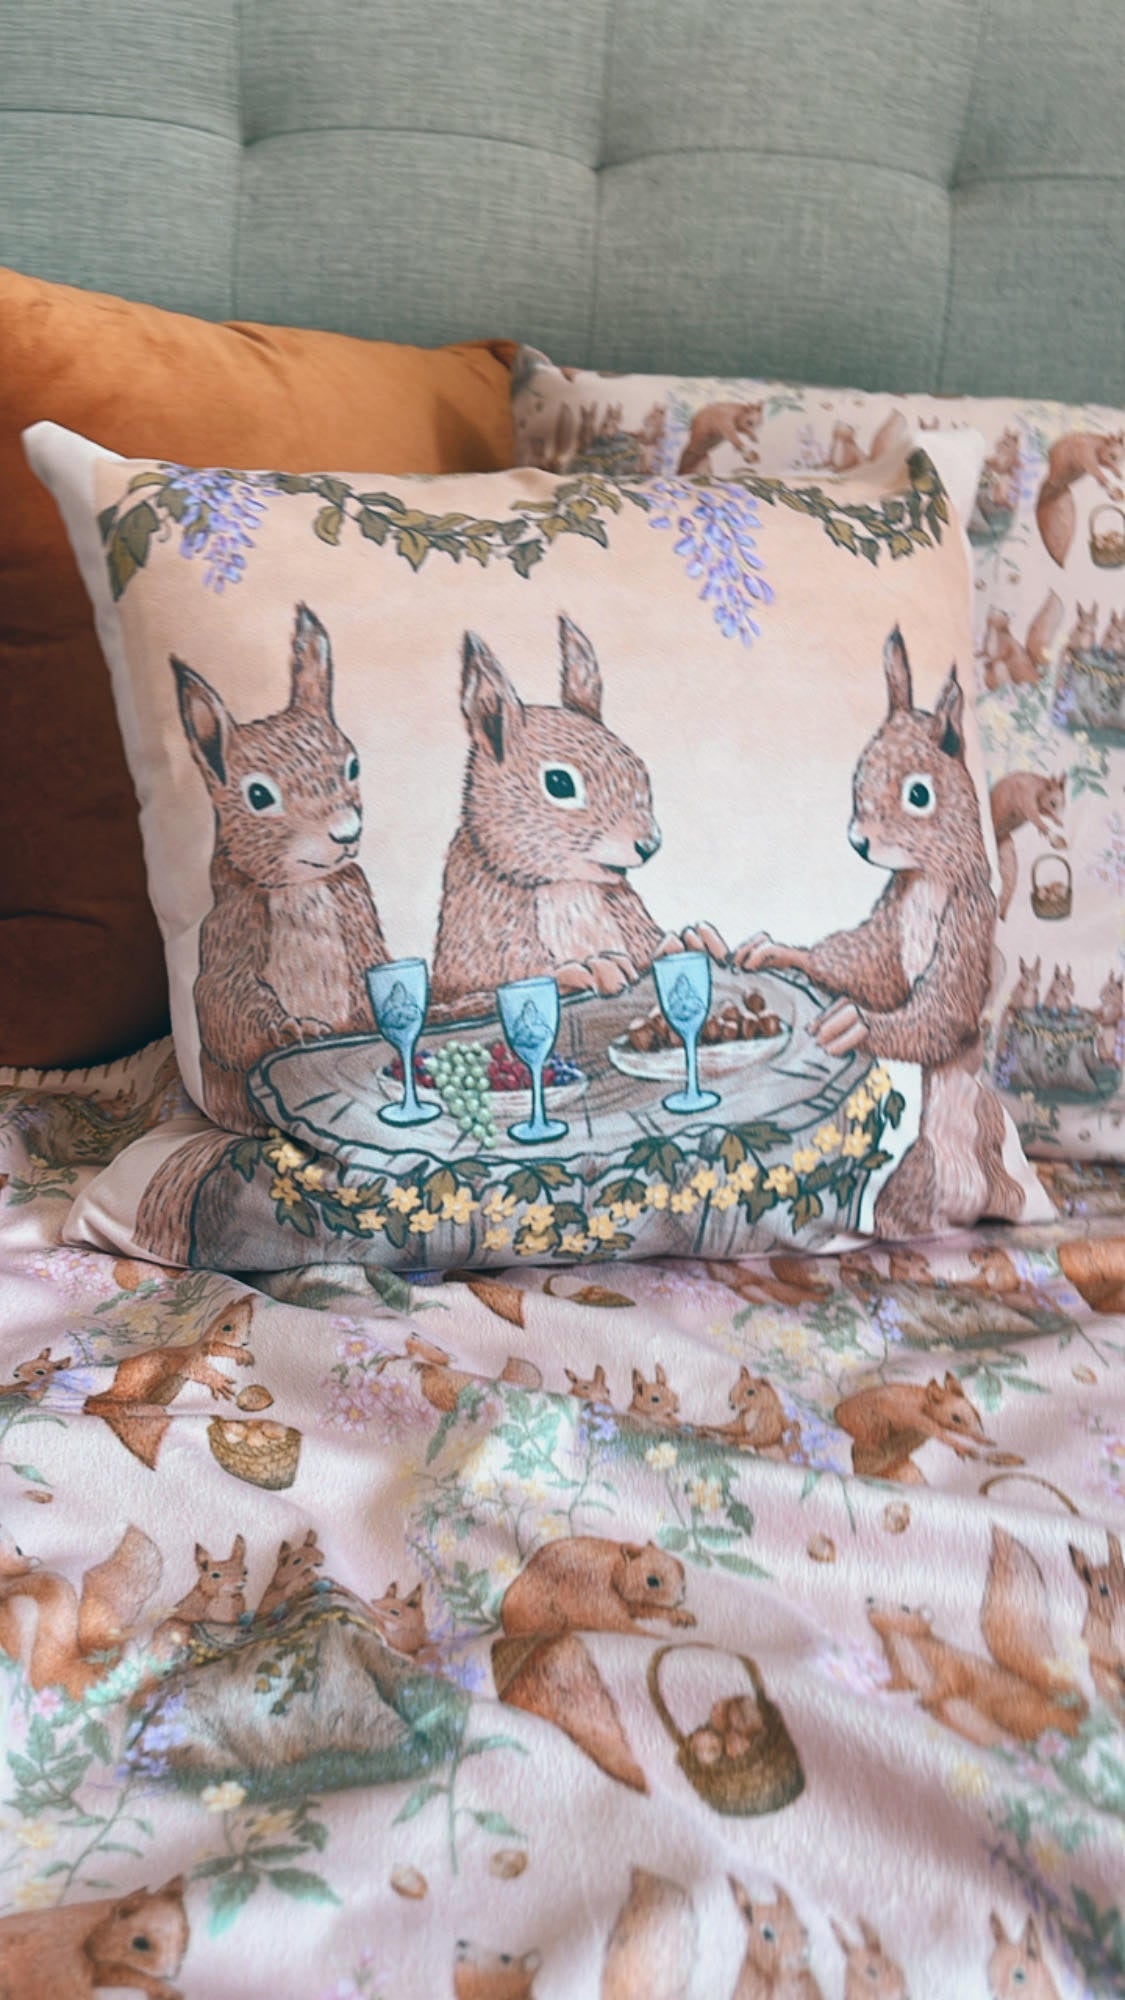 Willows Hedge - Squirrels Celebration Pillow Case